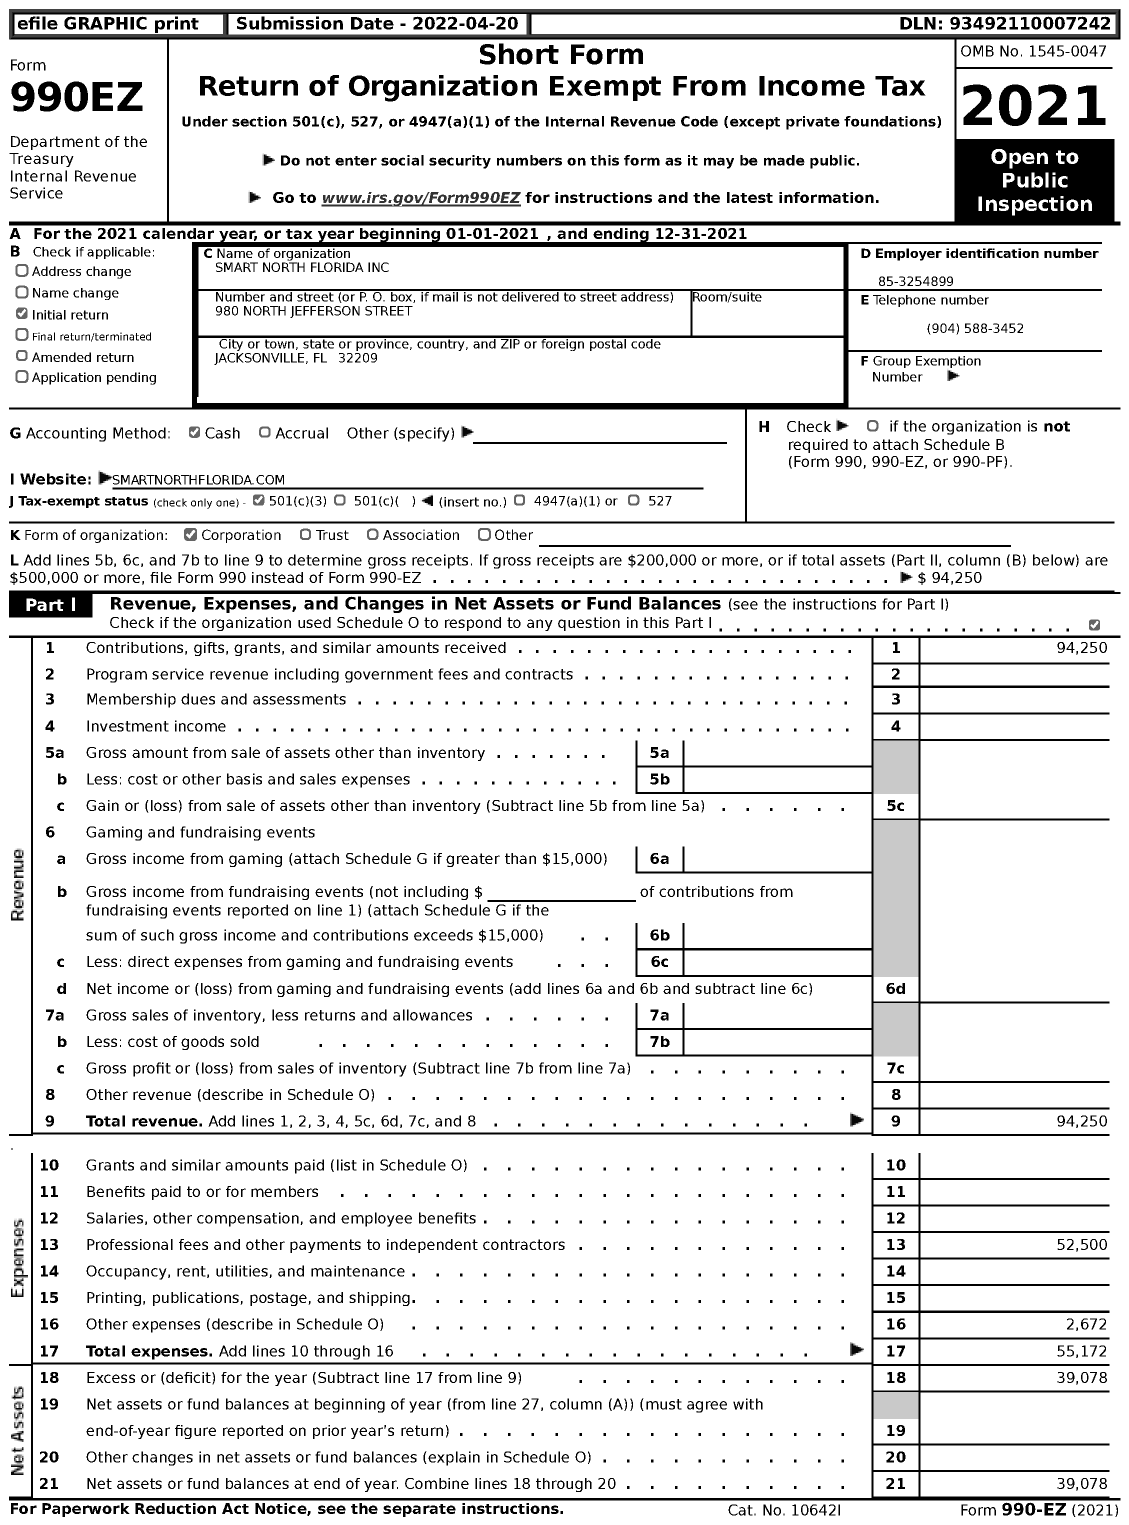 Image of first page of 2021 Form 990EZ for Smart North Florida